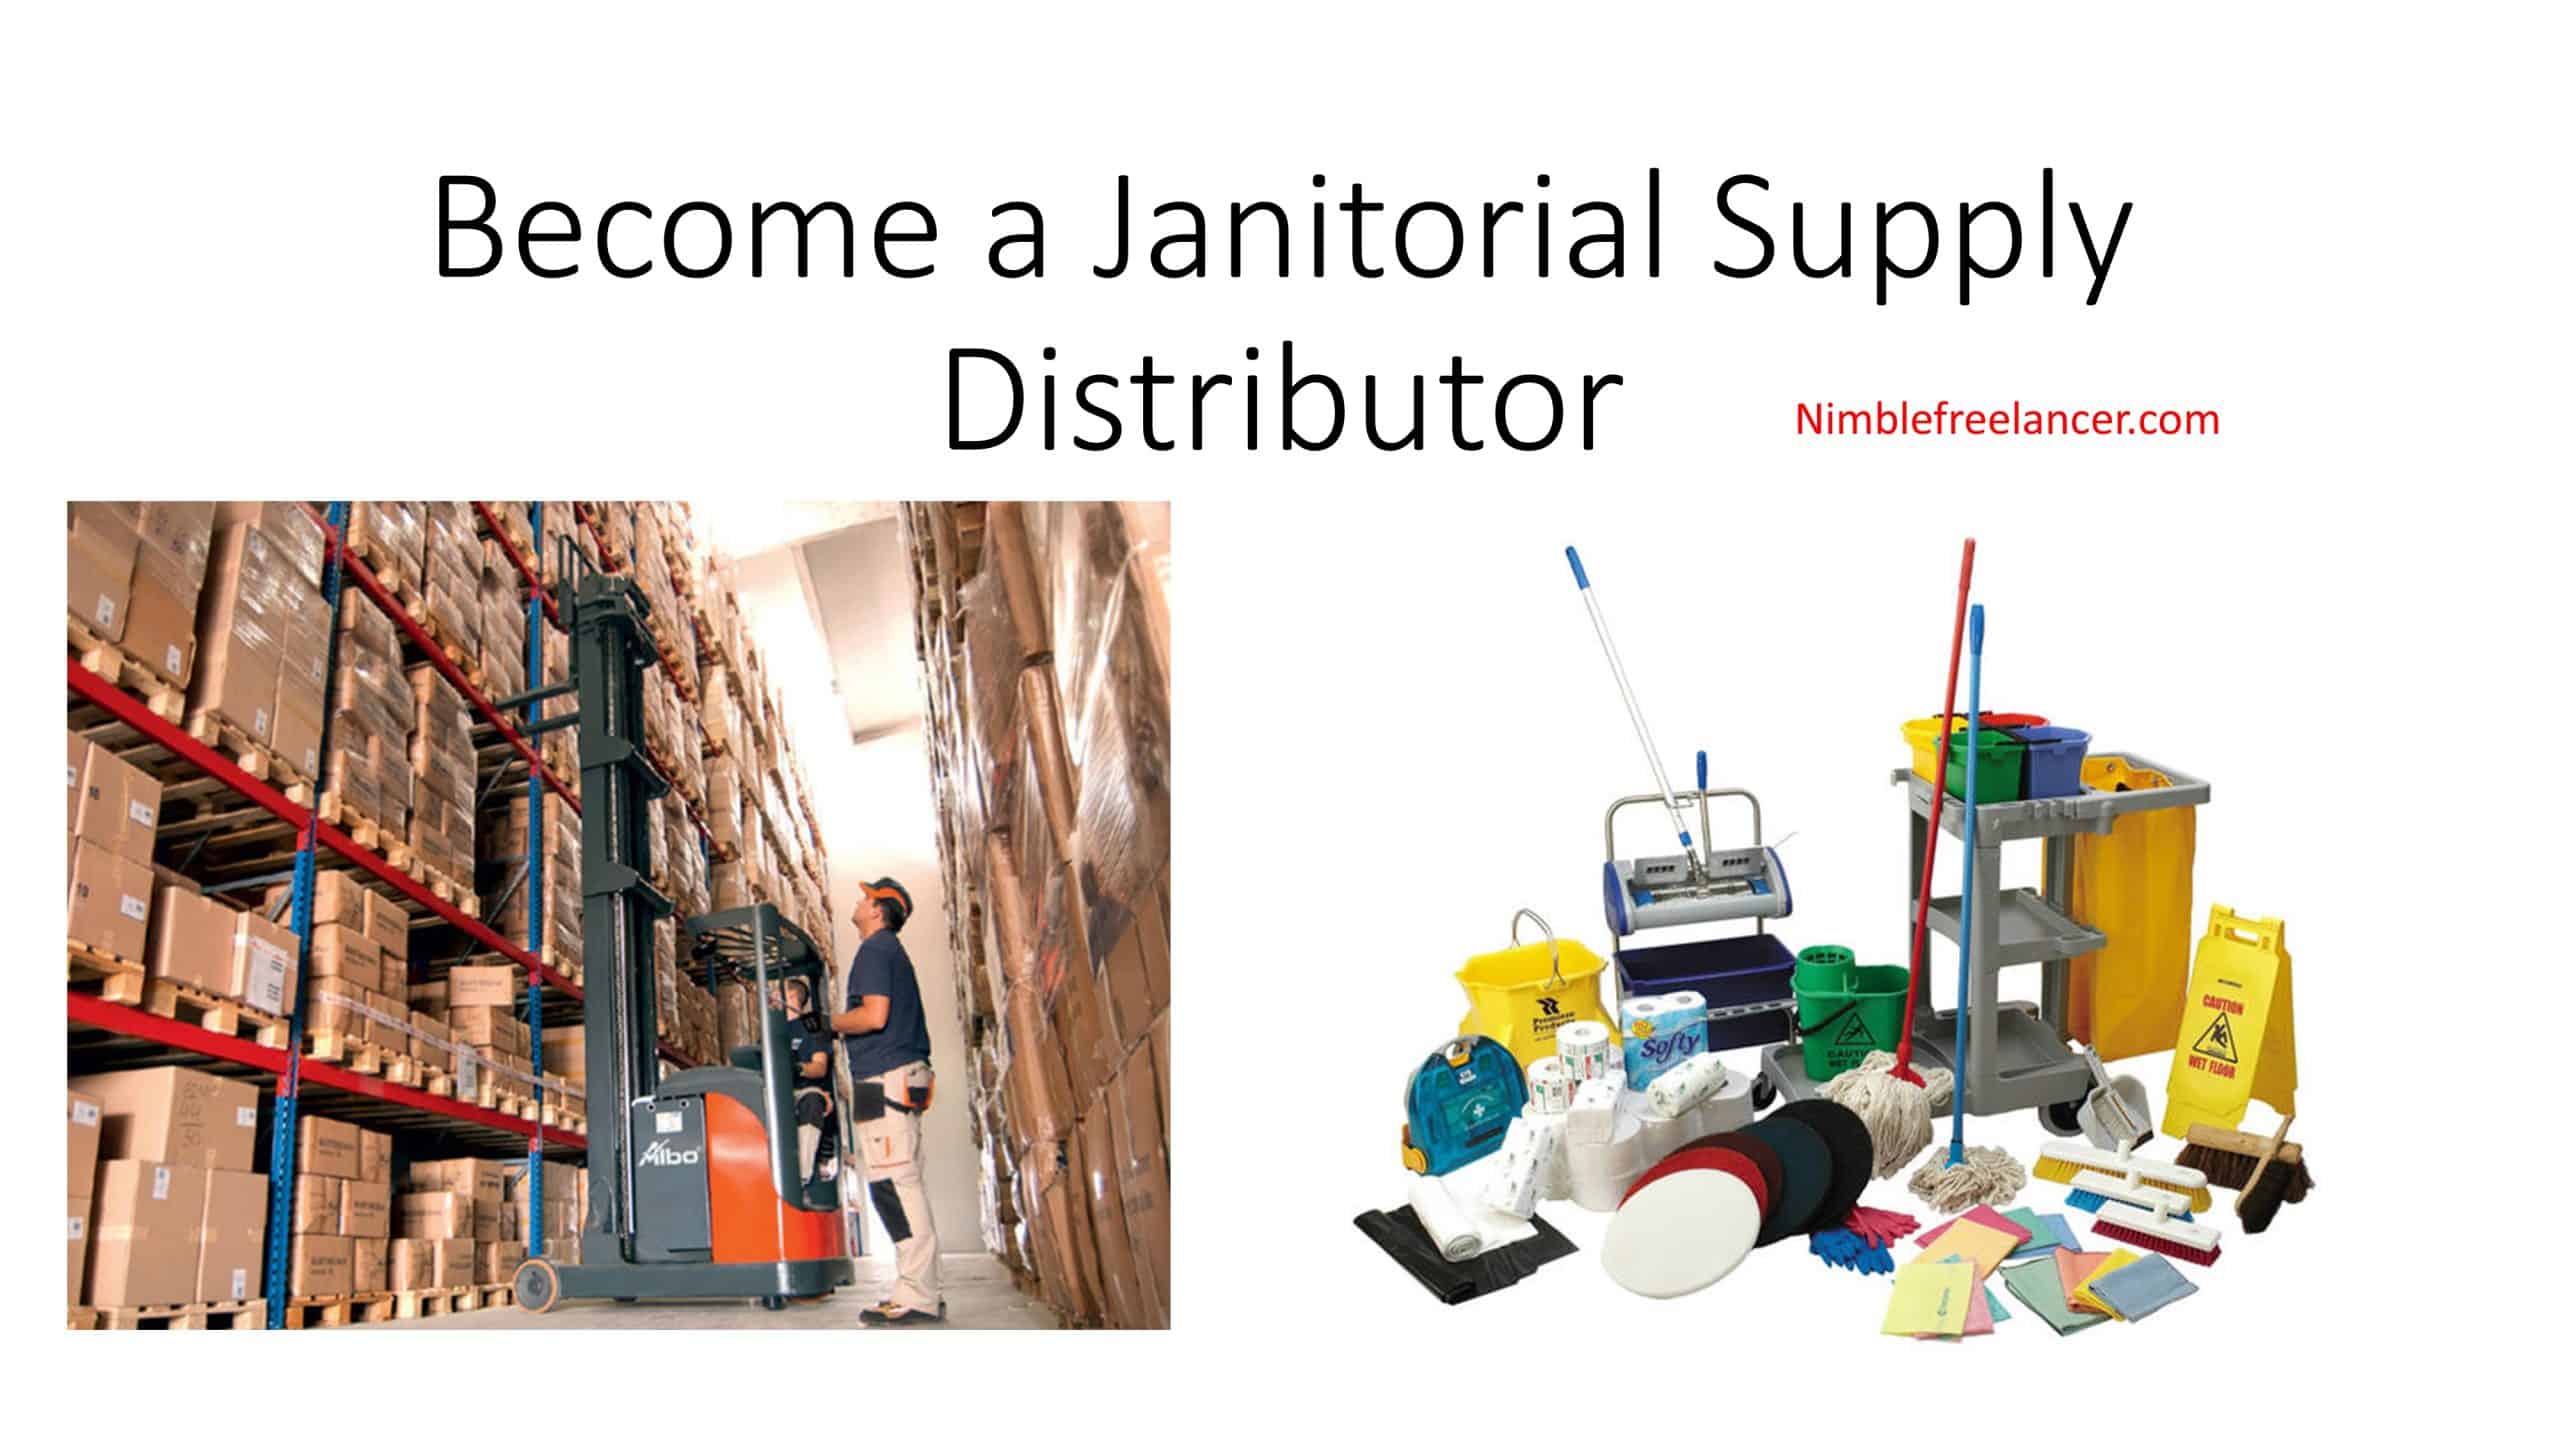 Become a Janitorial Supply Distributor